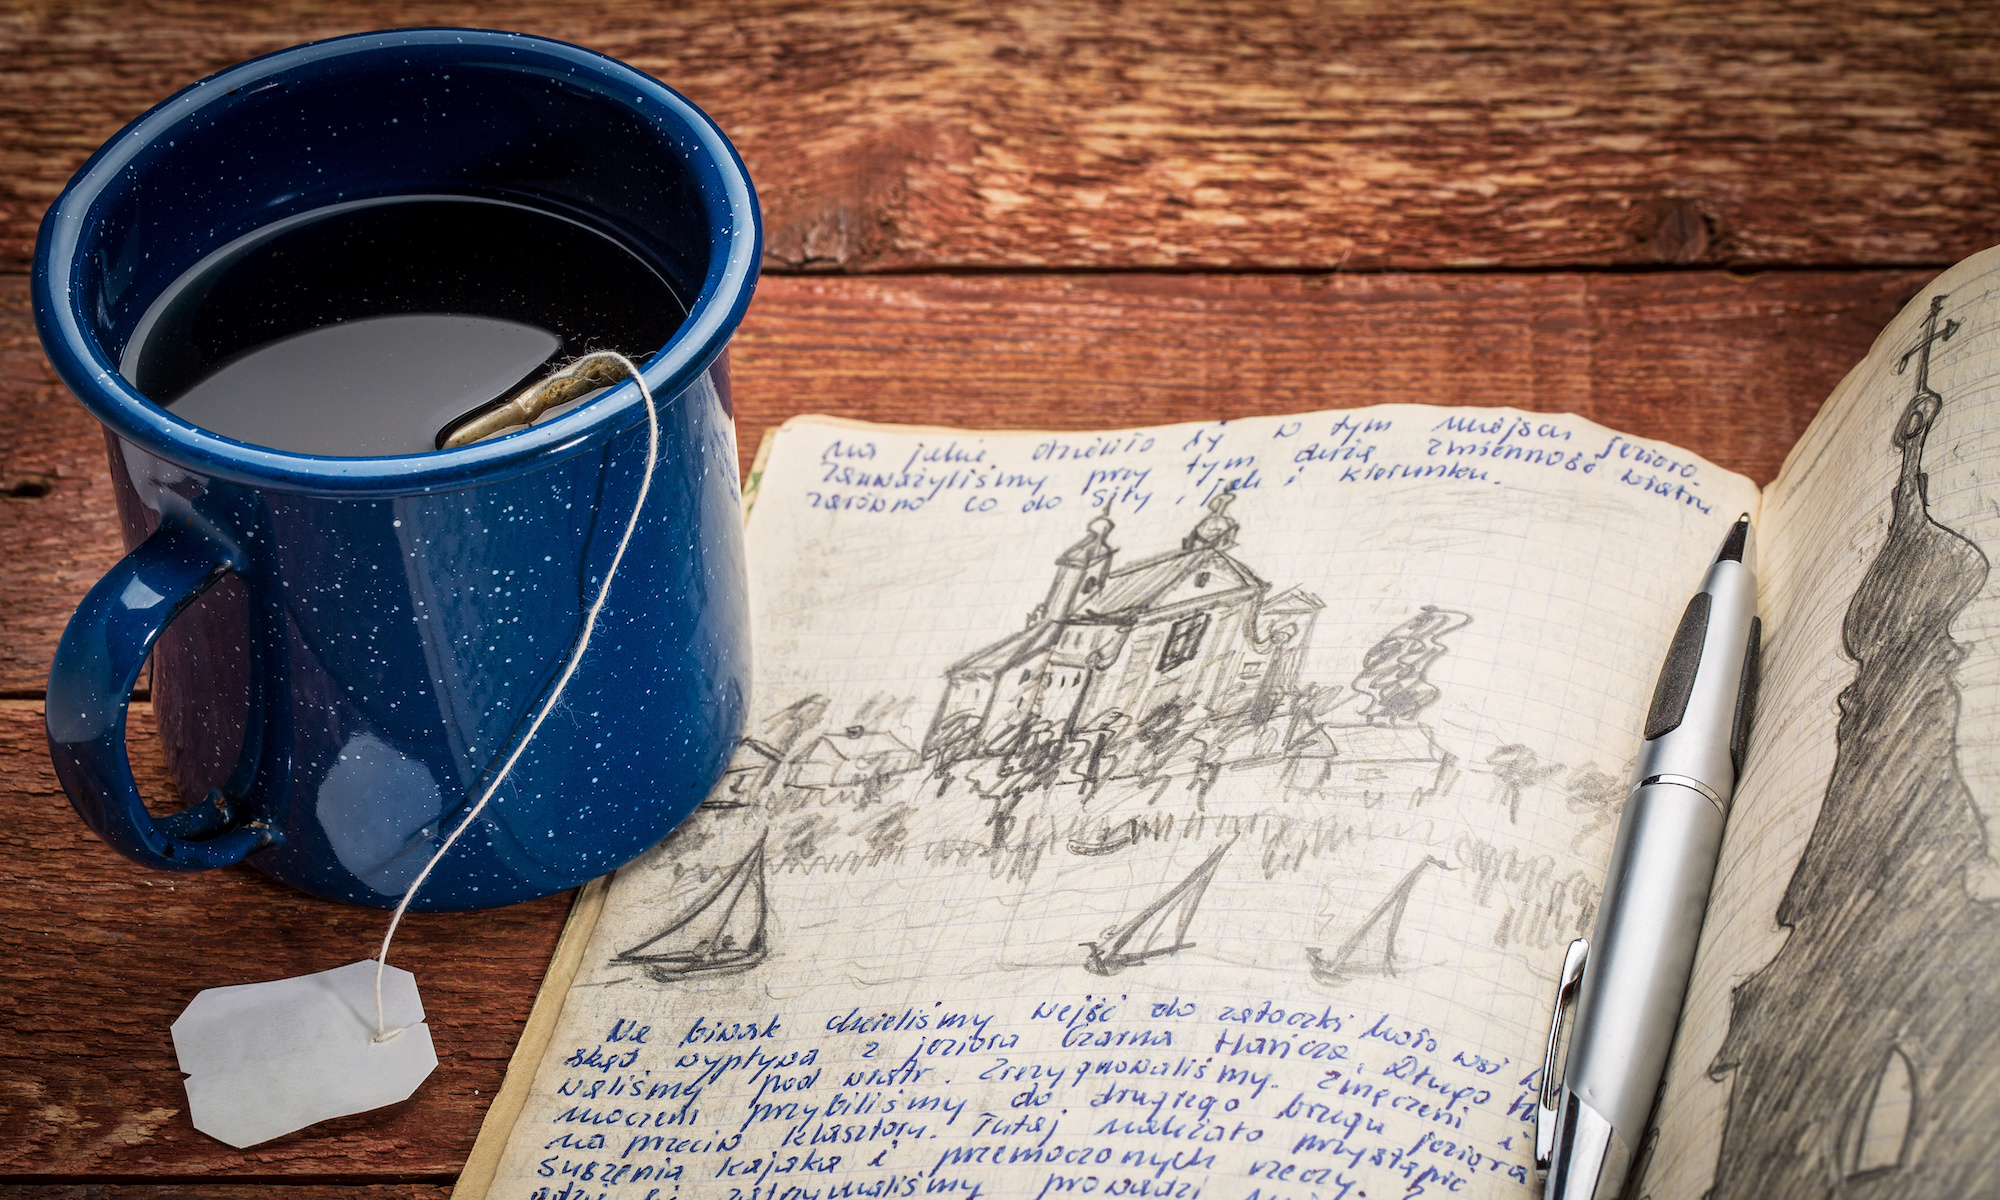 journal with handwriting and drawing in pencil in a notebook against rustic picnic table with cup of tea